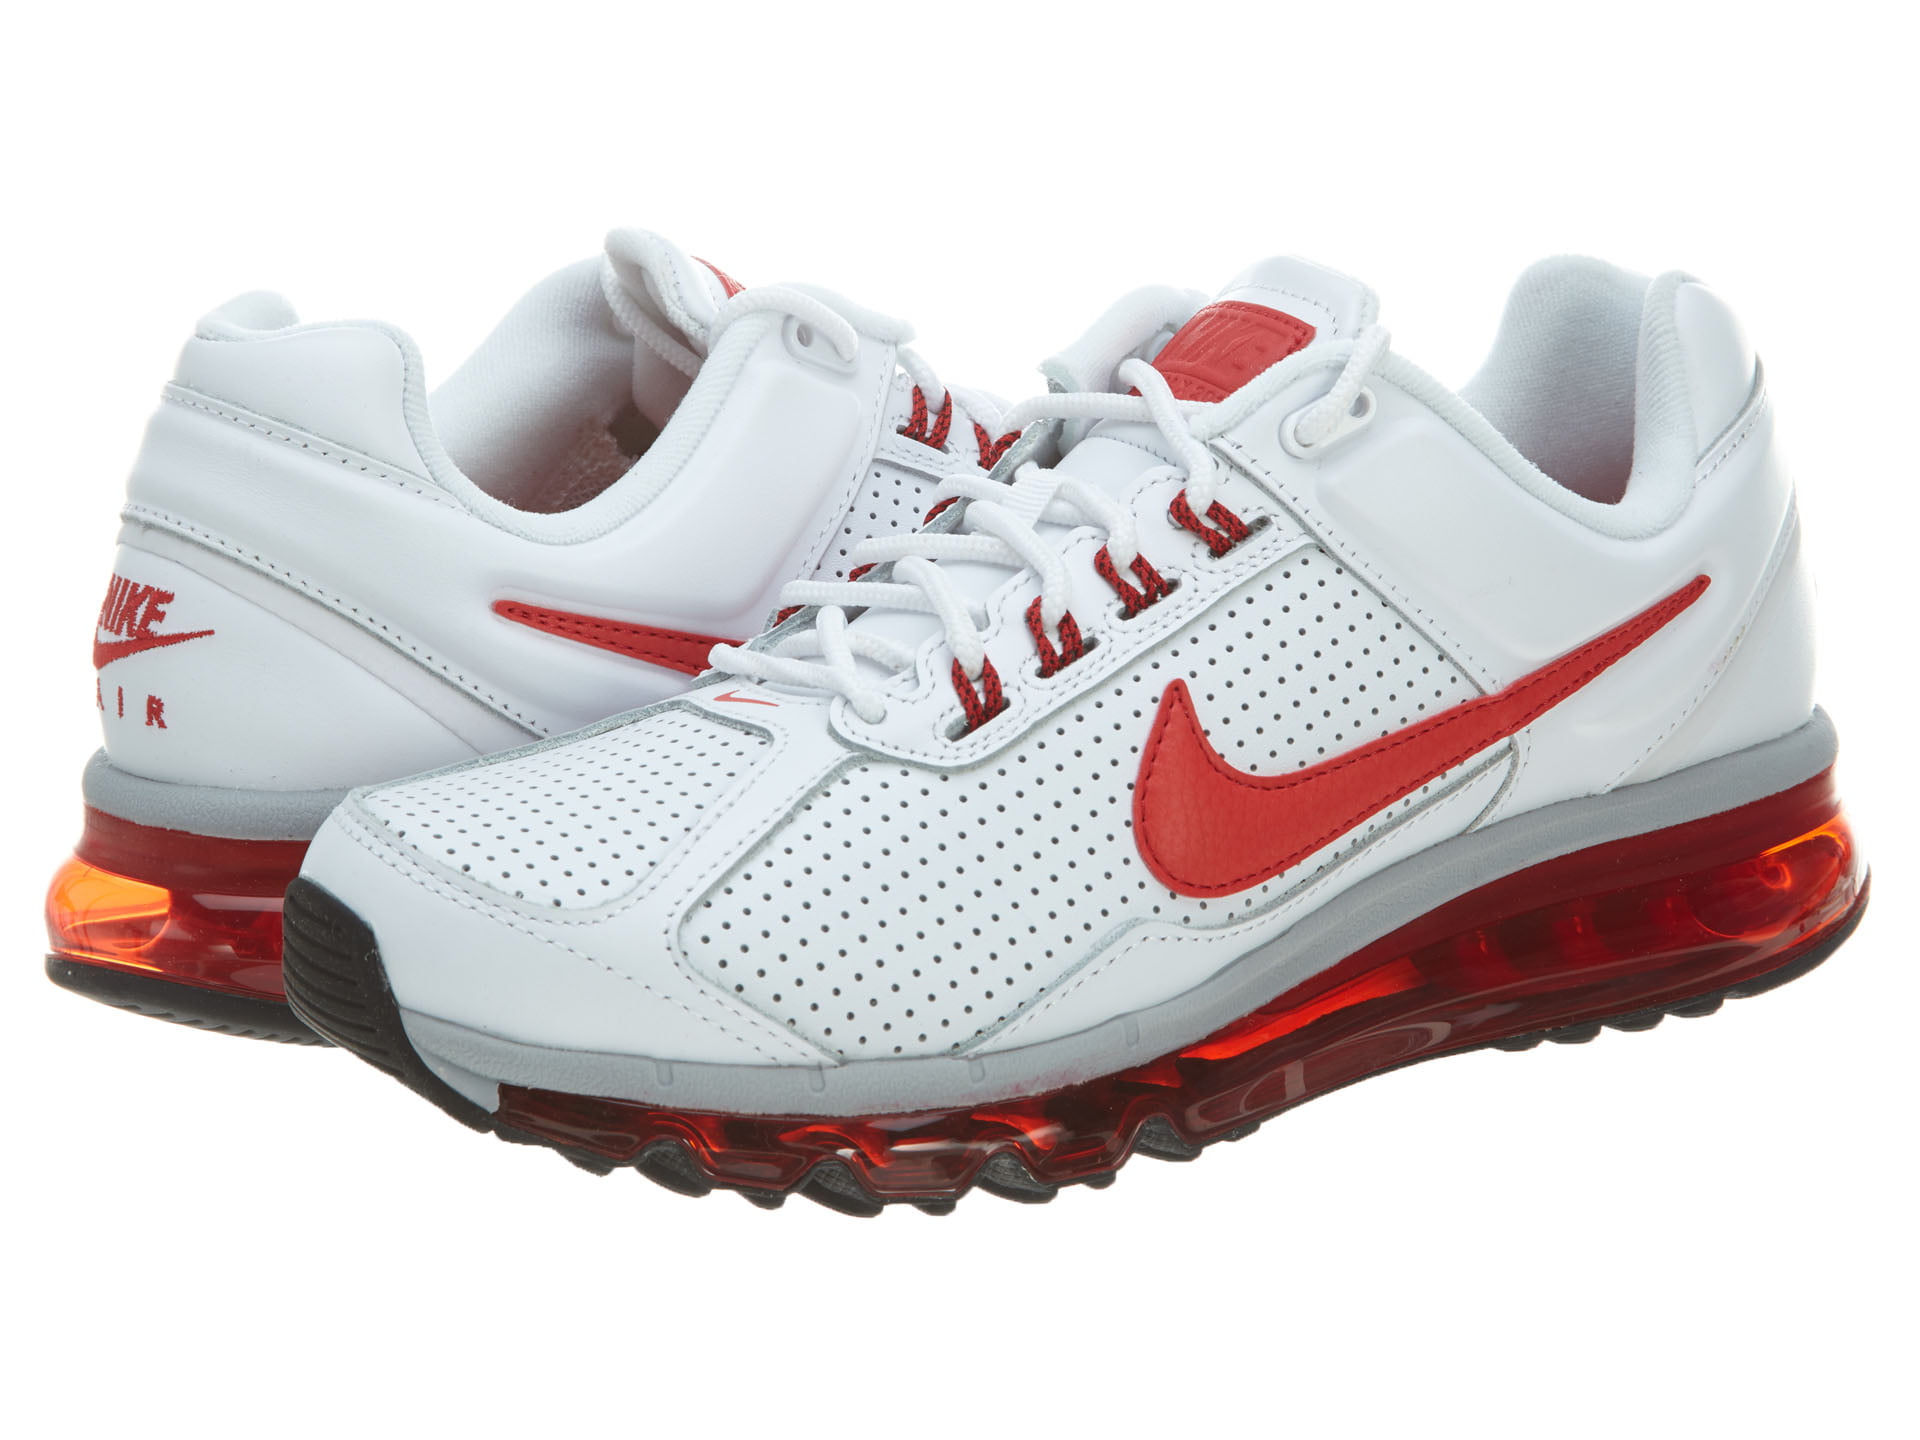 Nike Nike Air Max 2013 Leather Mens Style 599455